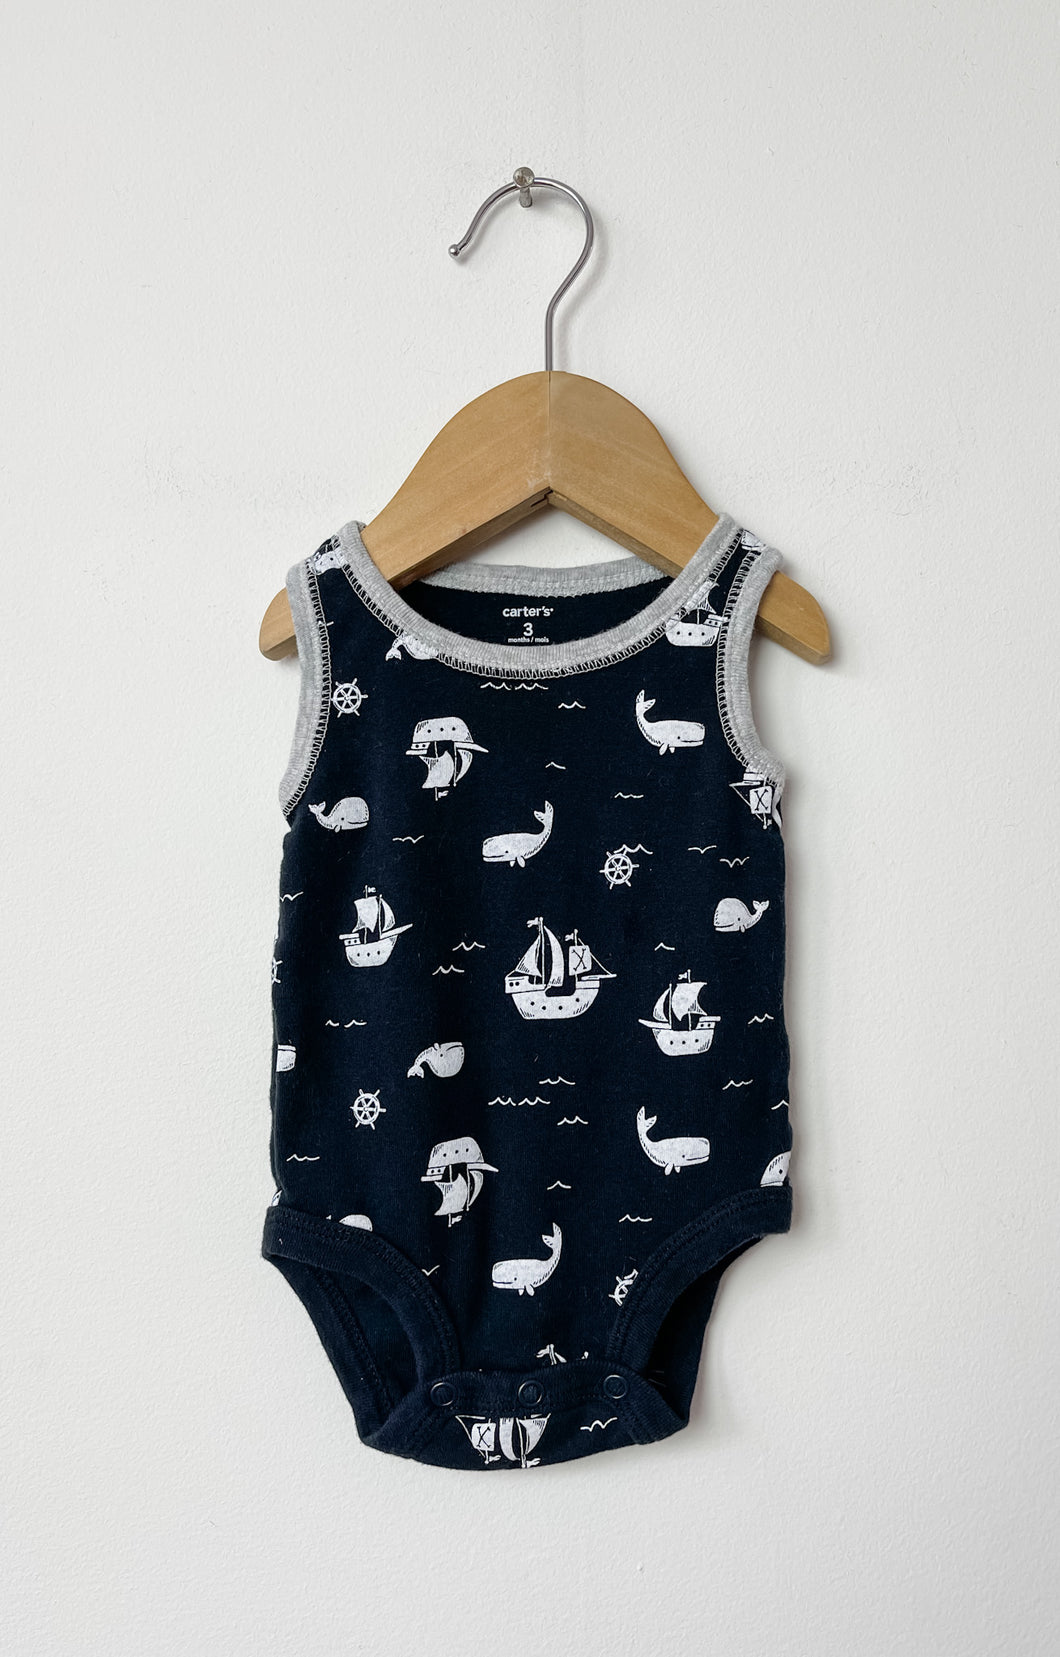 Carters 4 Pack Bodysuits Size 3 Months